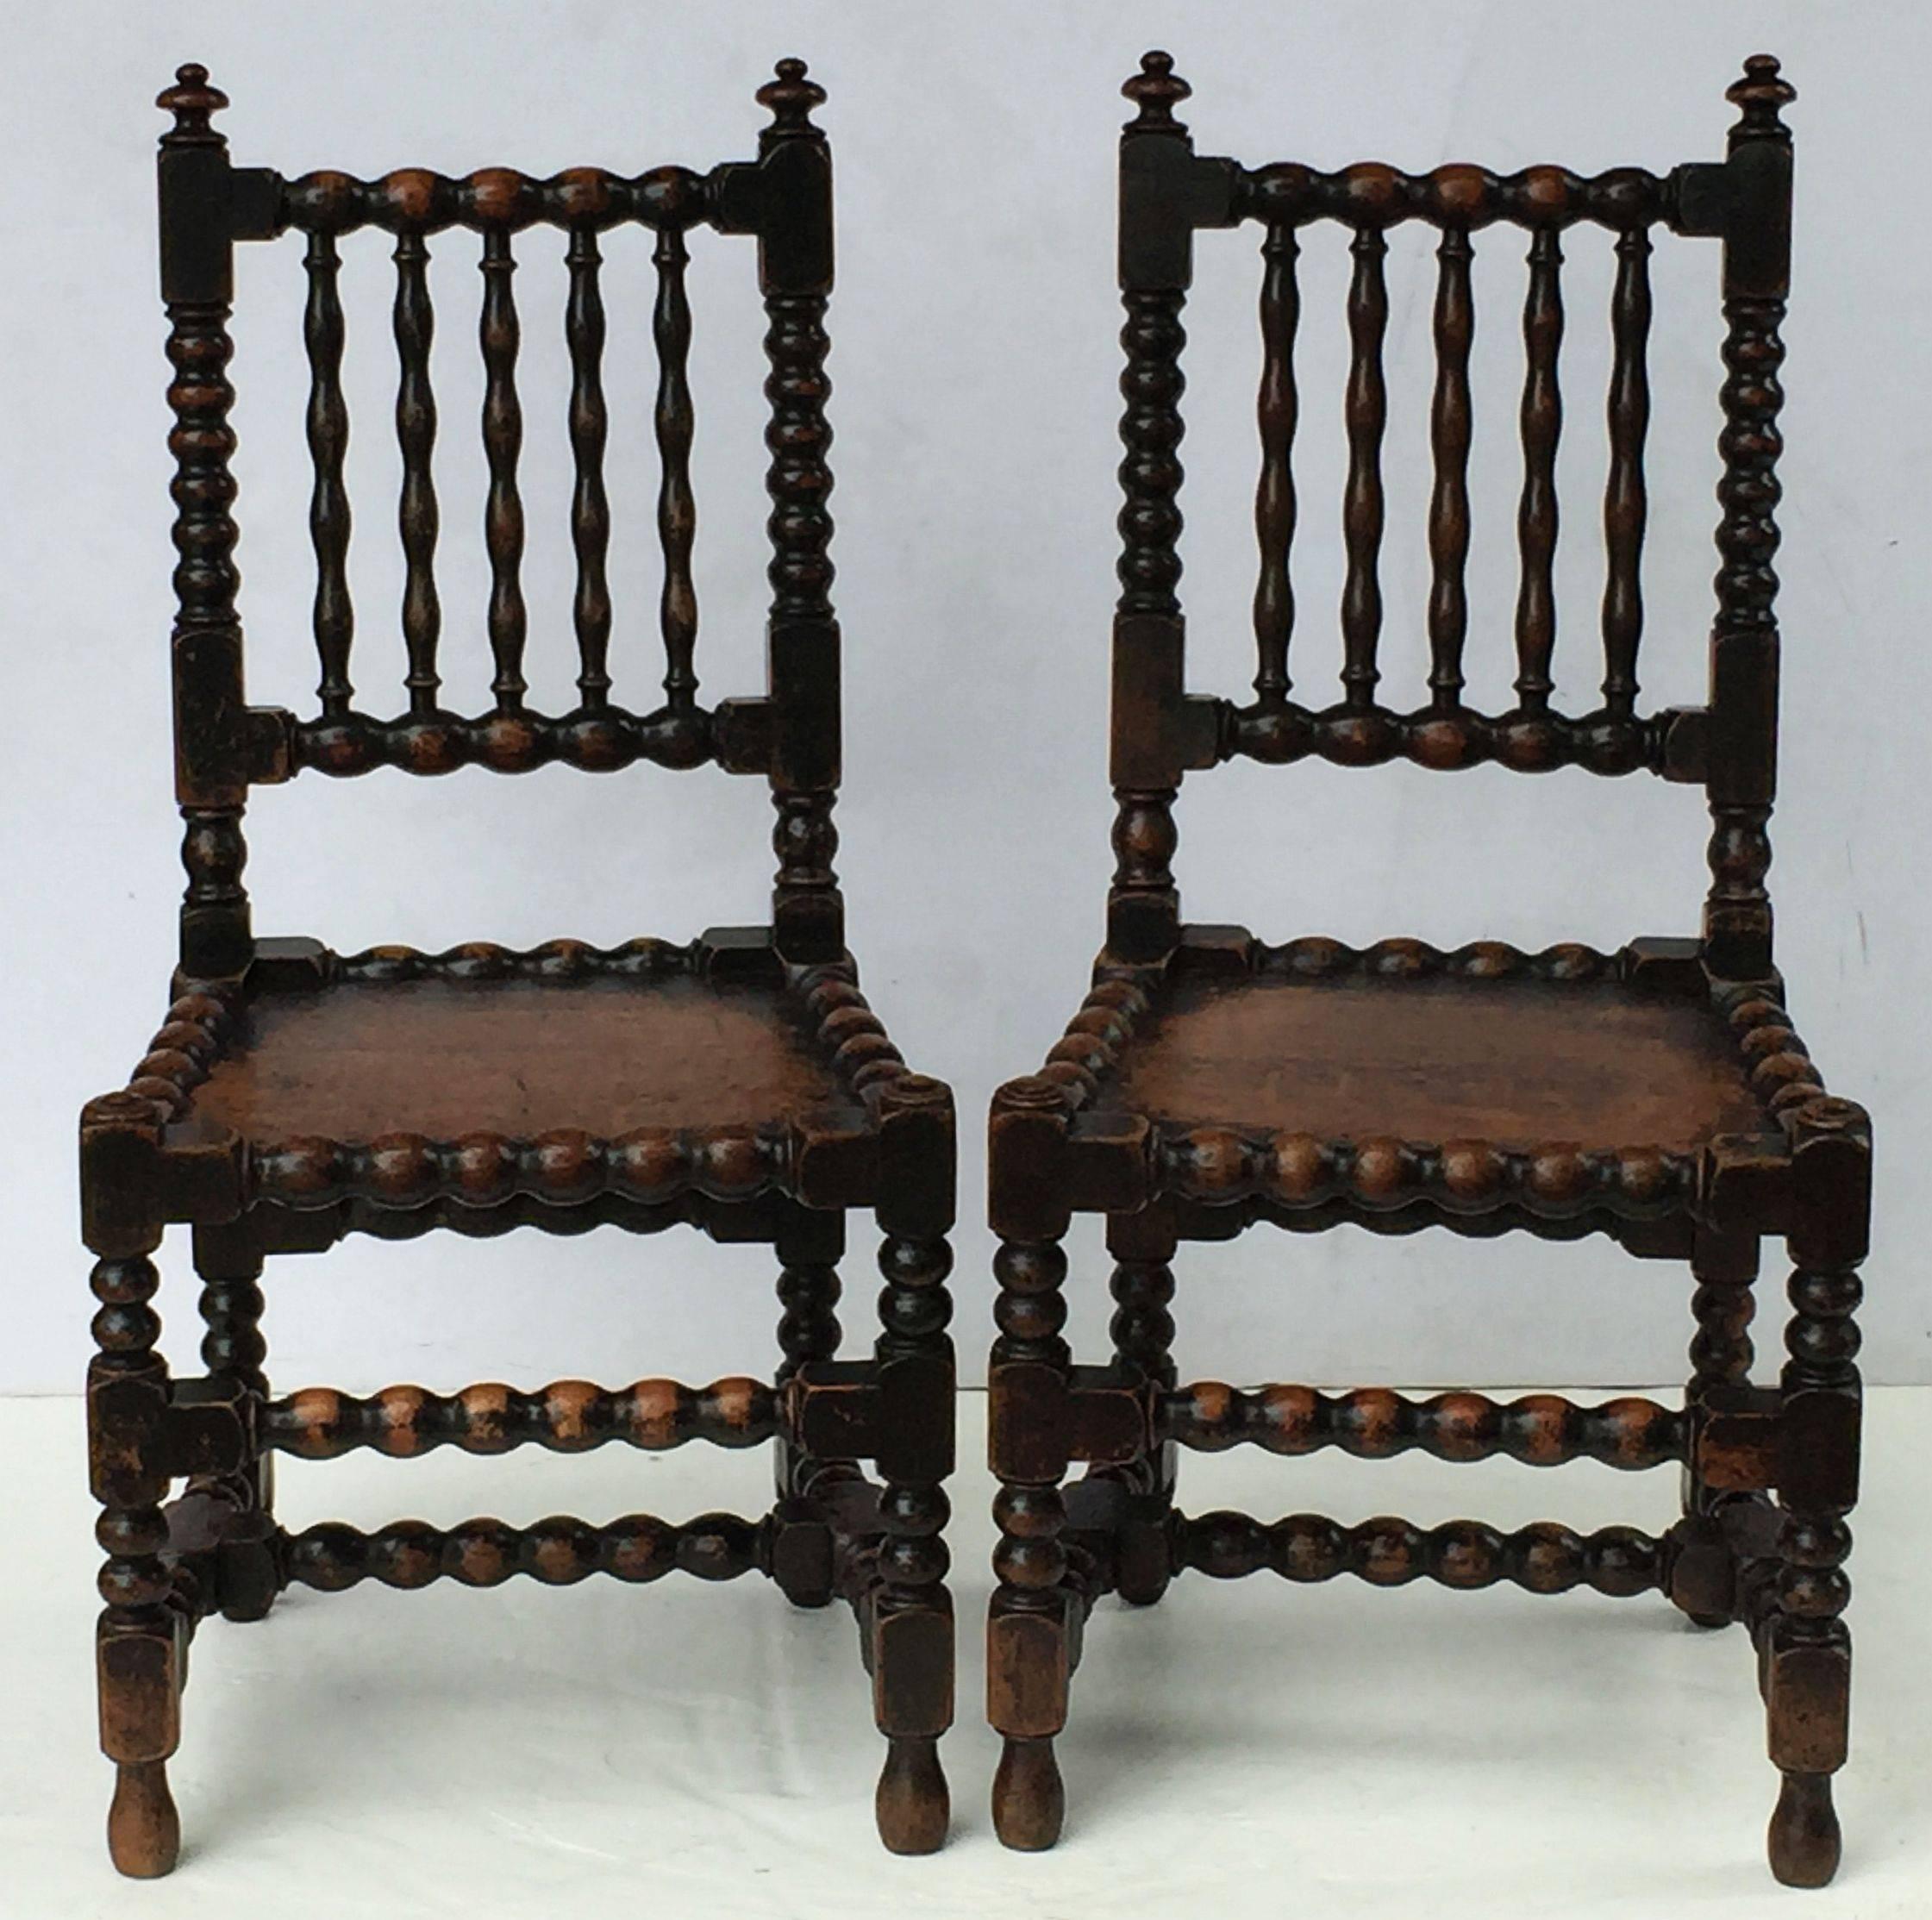 A fine pair of English bobbin turned chairs of oak from the Georgian period, each chair featuring a handsome patina, solid seat and turned back and legs.

Two chairs available, priced individually - $2495 each chair.